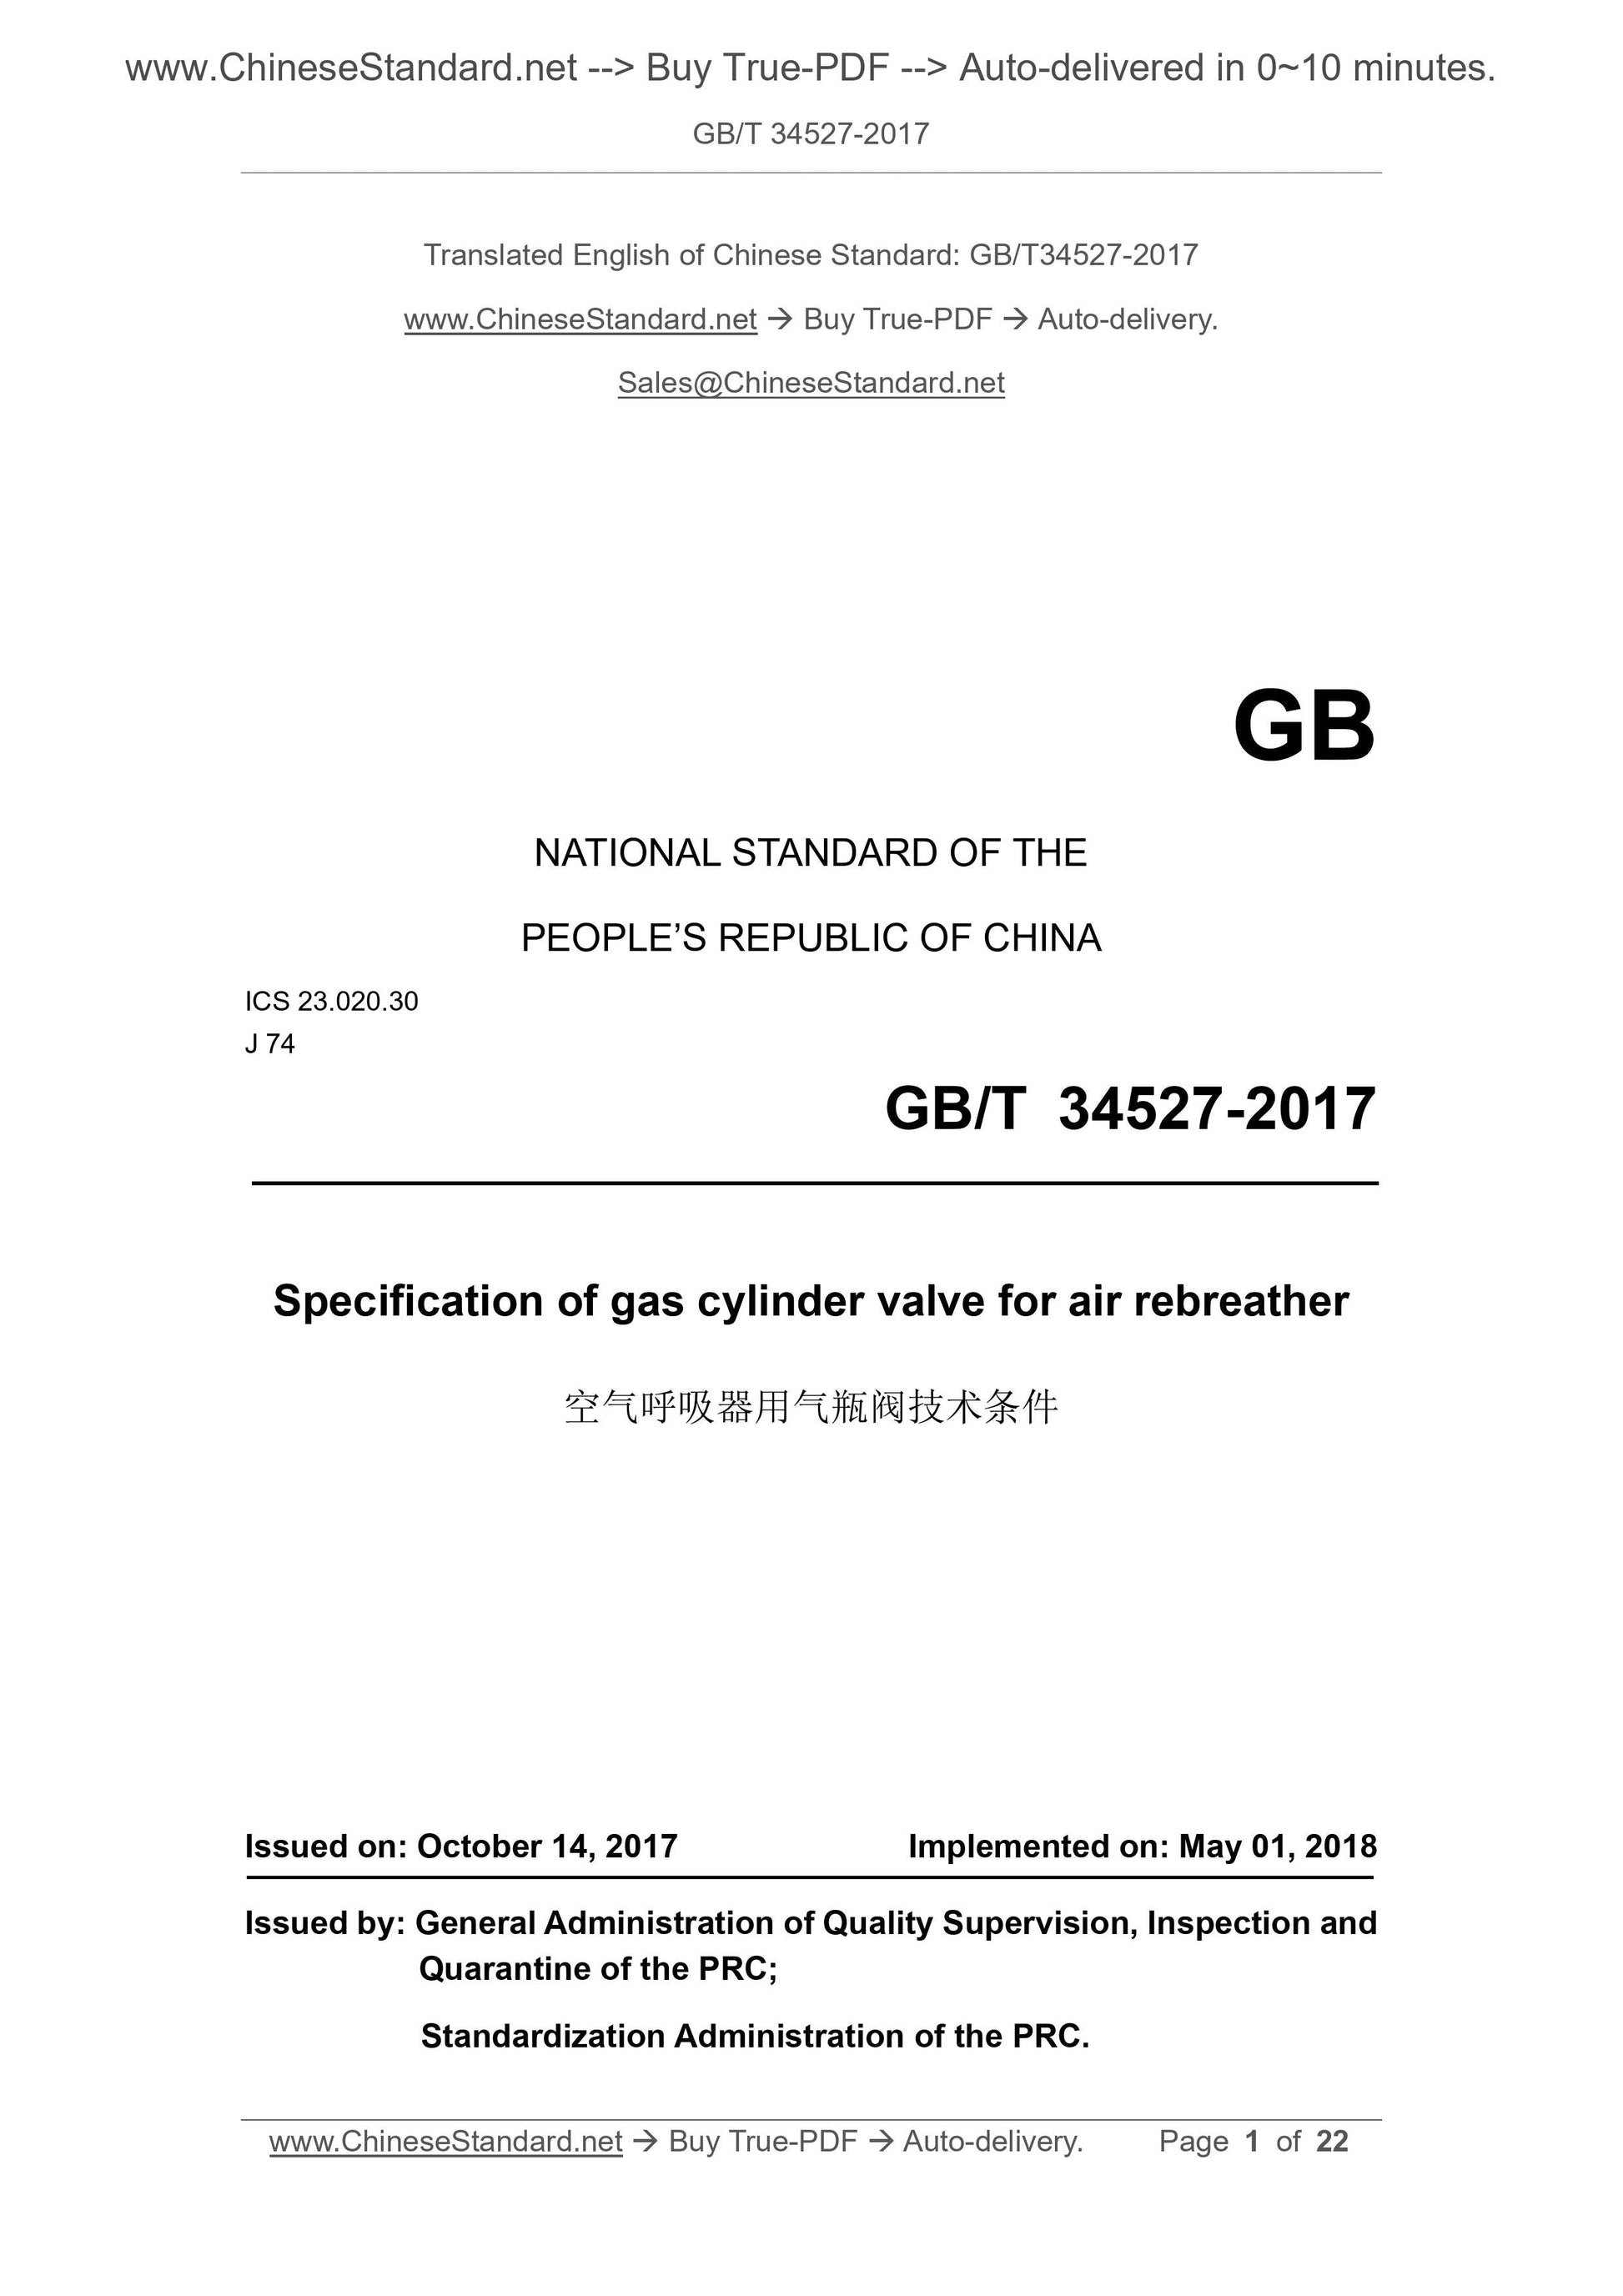 GB/T 34527-2017 Page 1